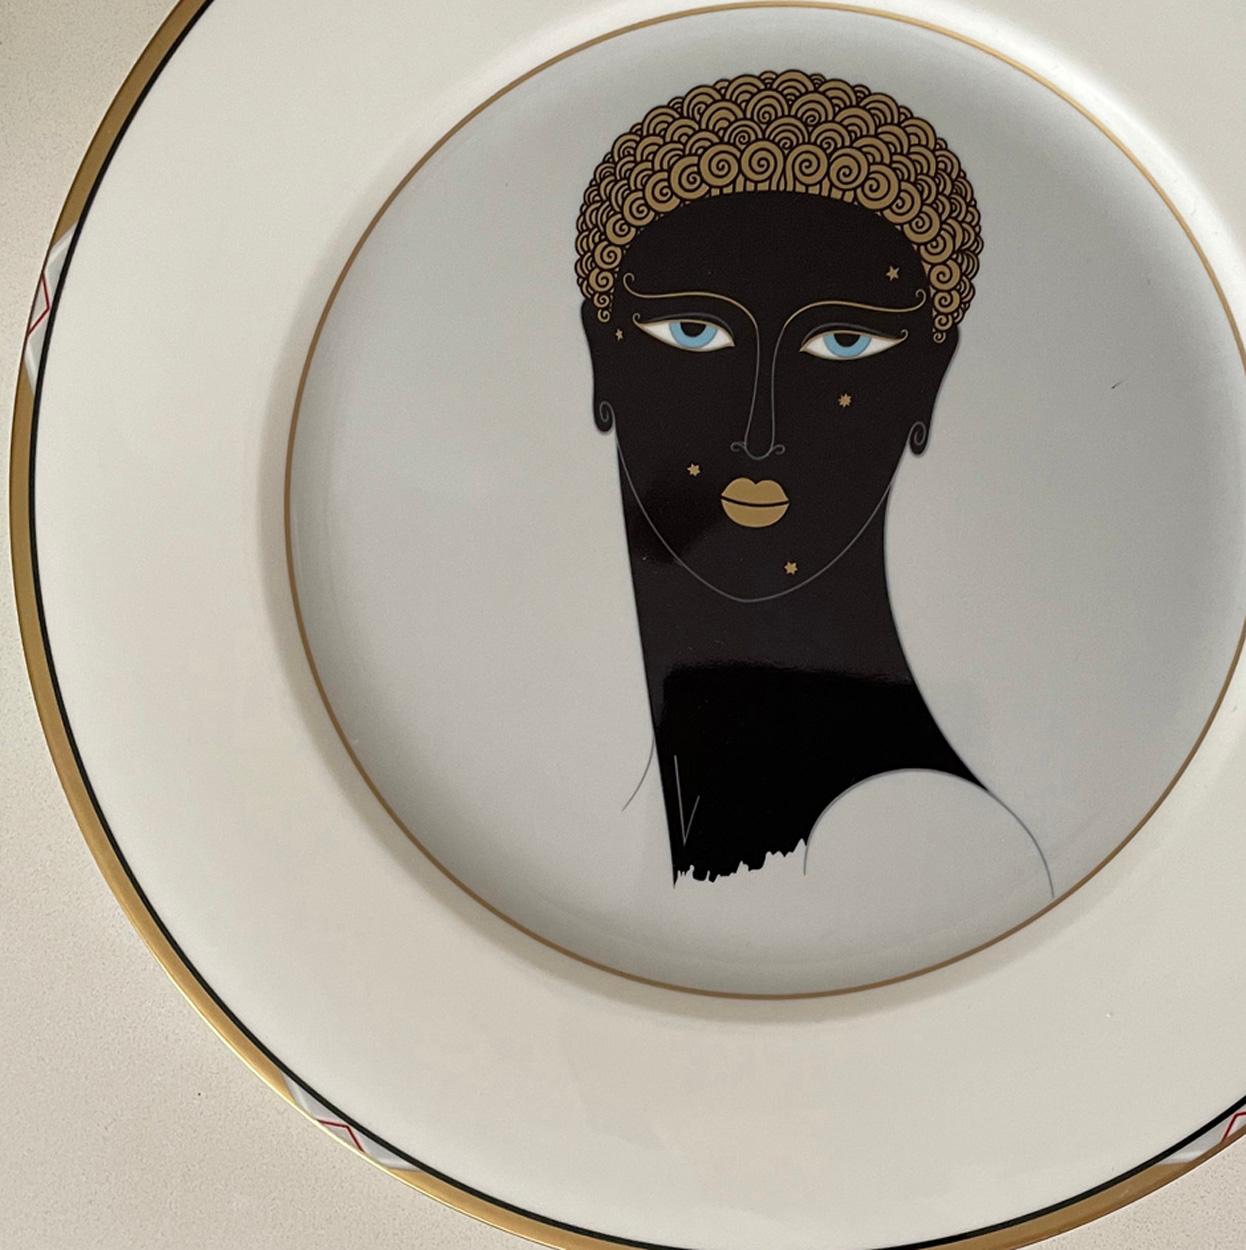 French Queen Of Sheba Plate, Bone China, Erte (after), 1987